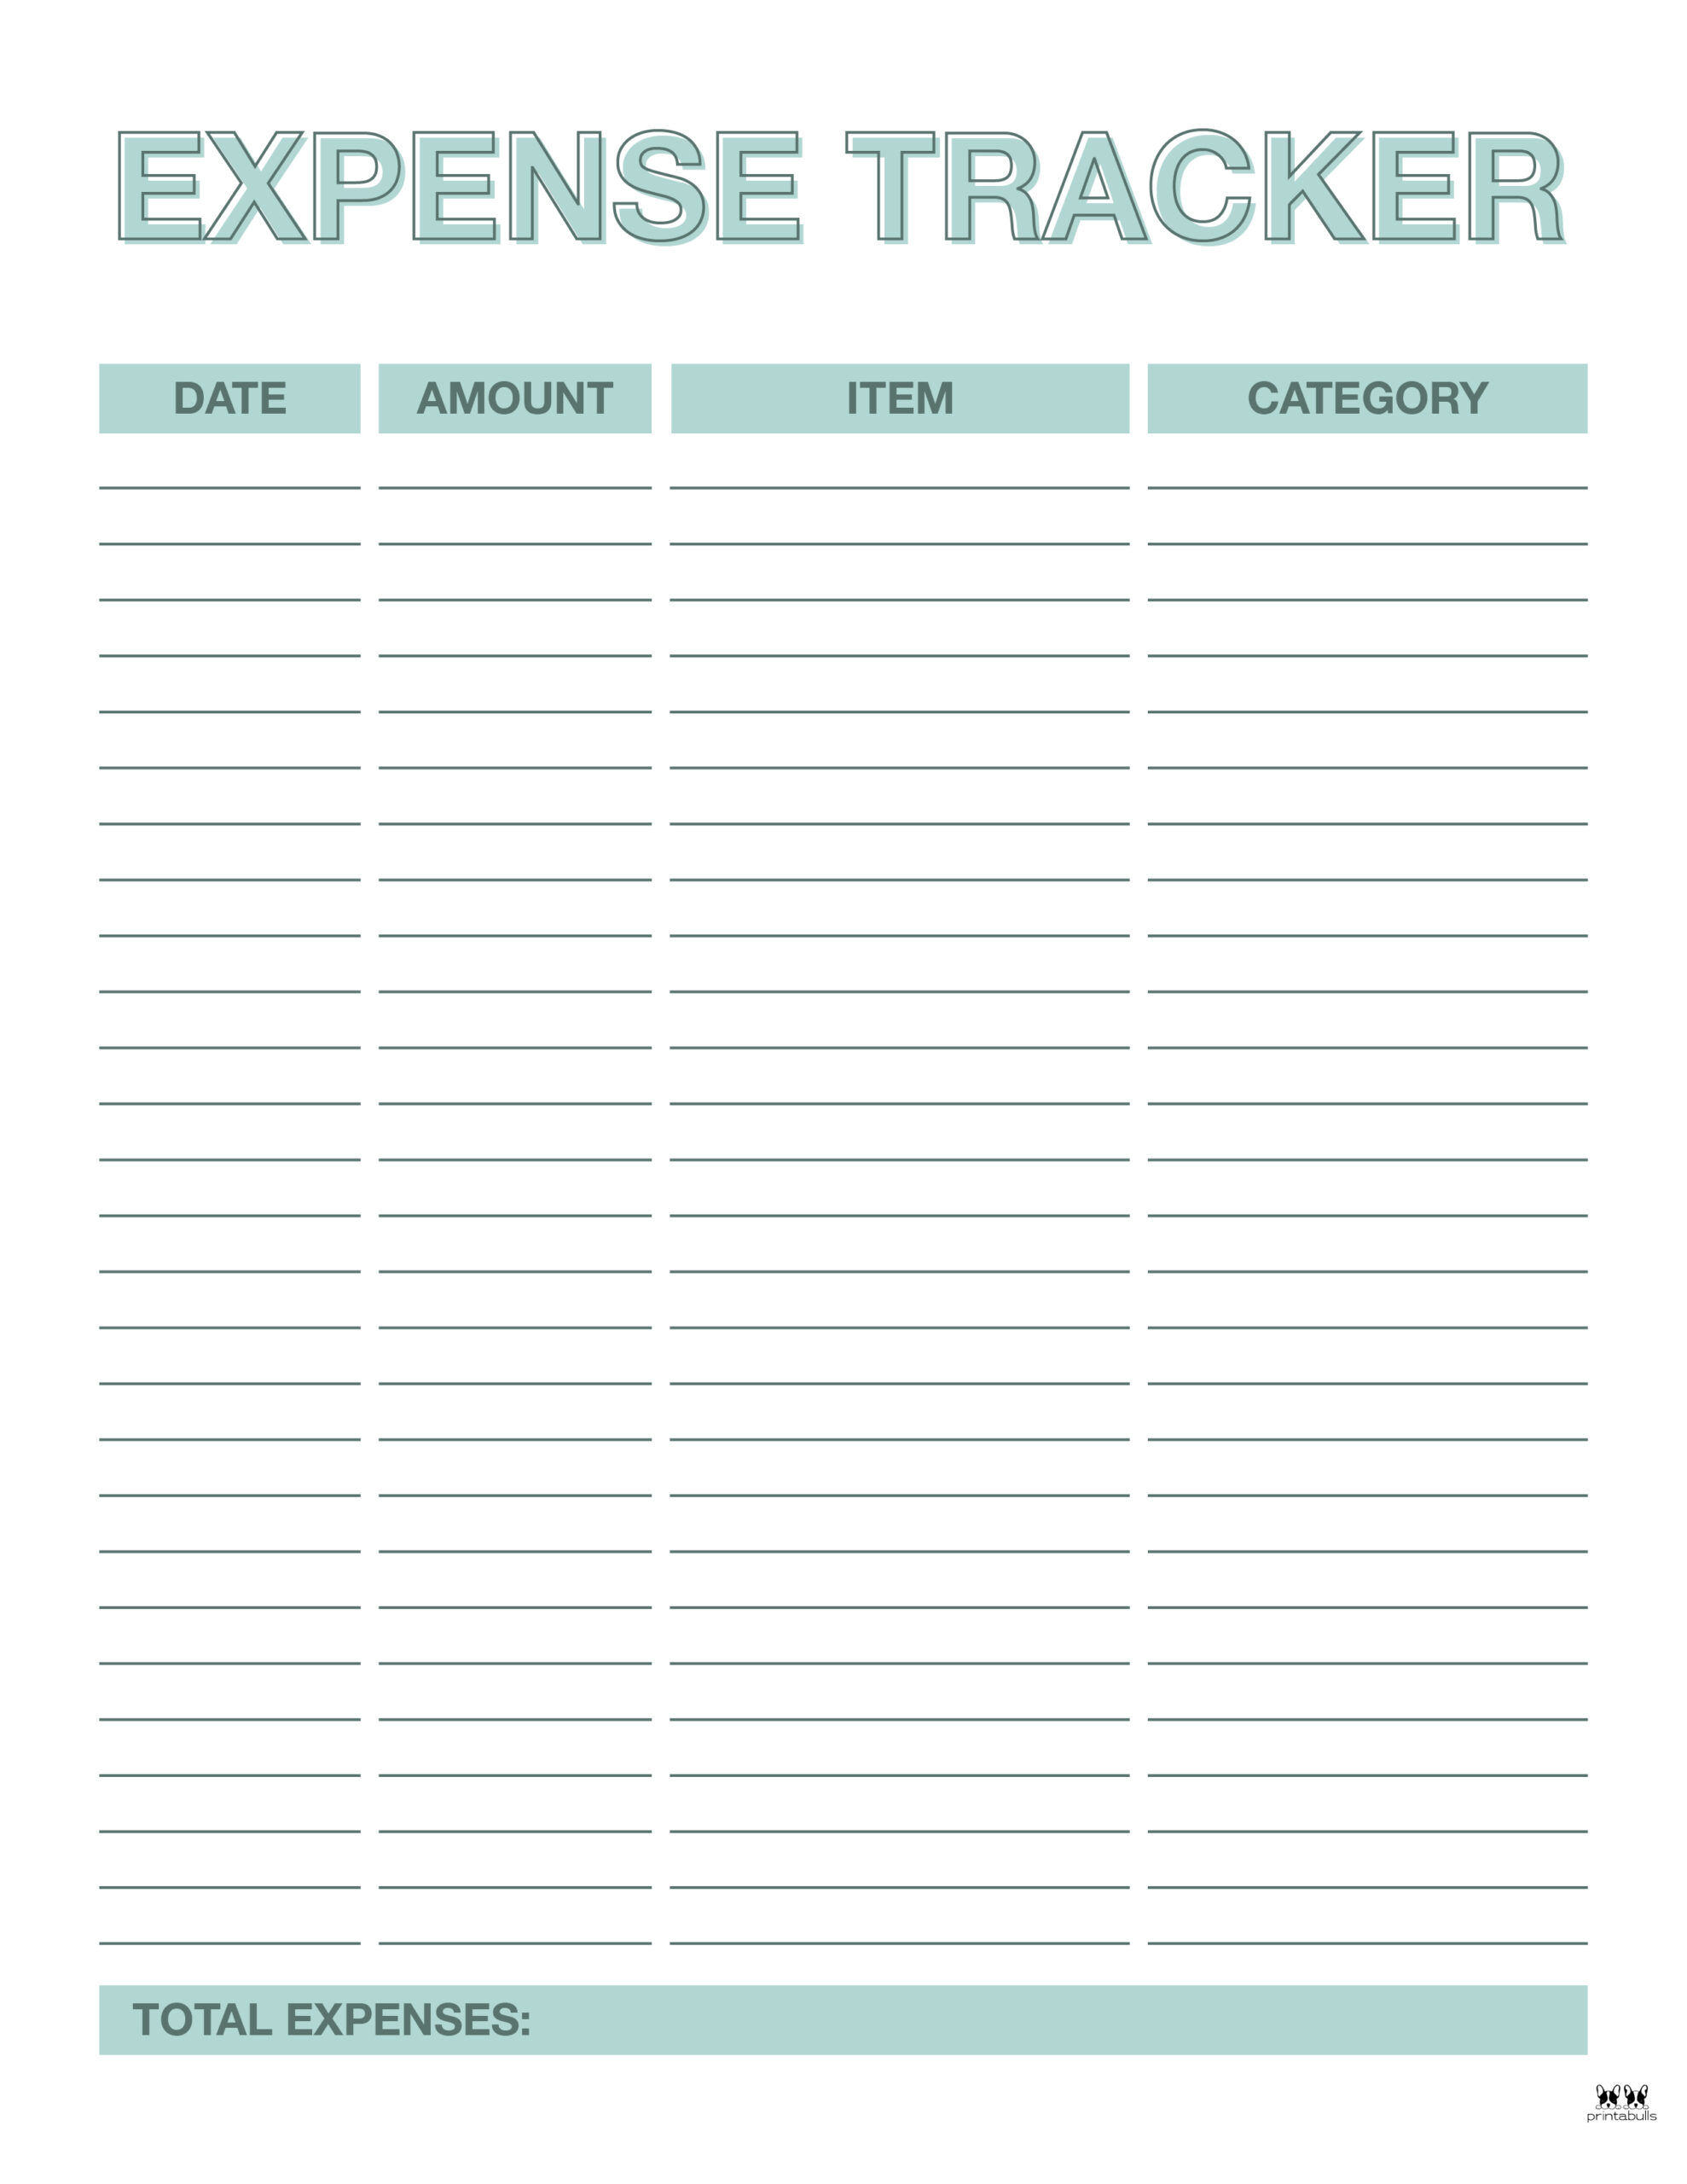 expense-tracker-printable-charlotte-clergy-coalition-uncommonly-google